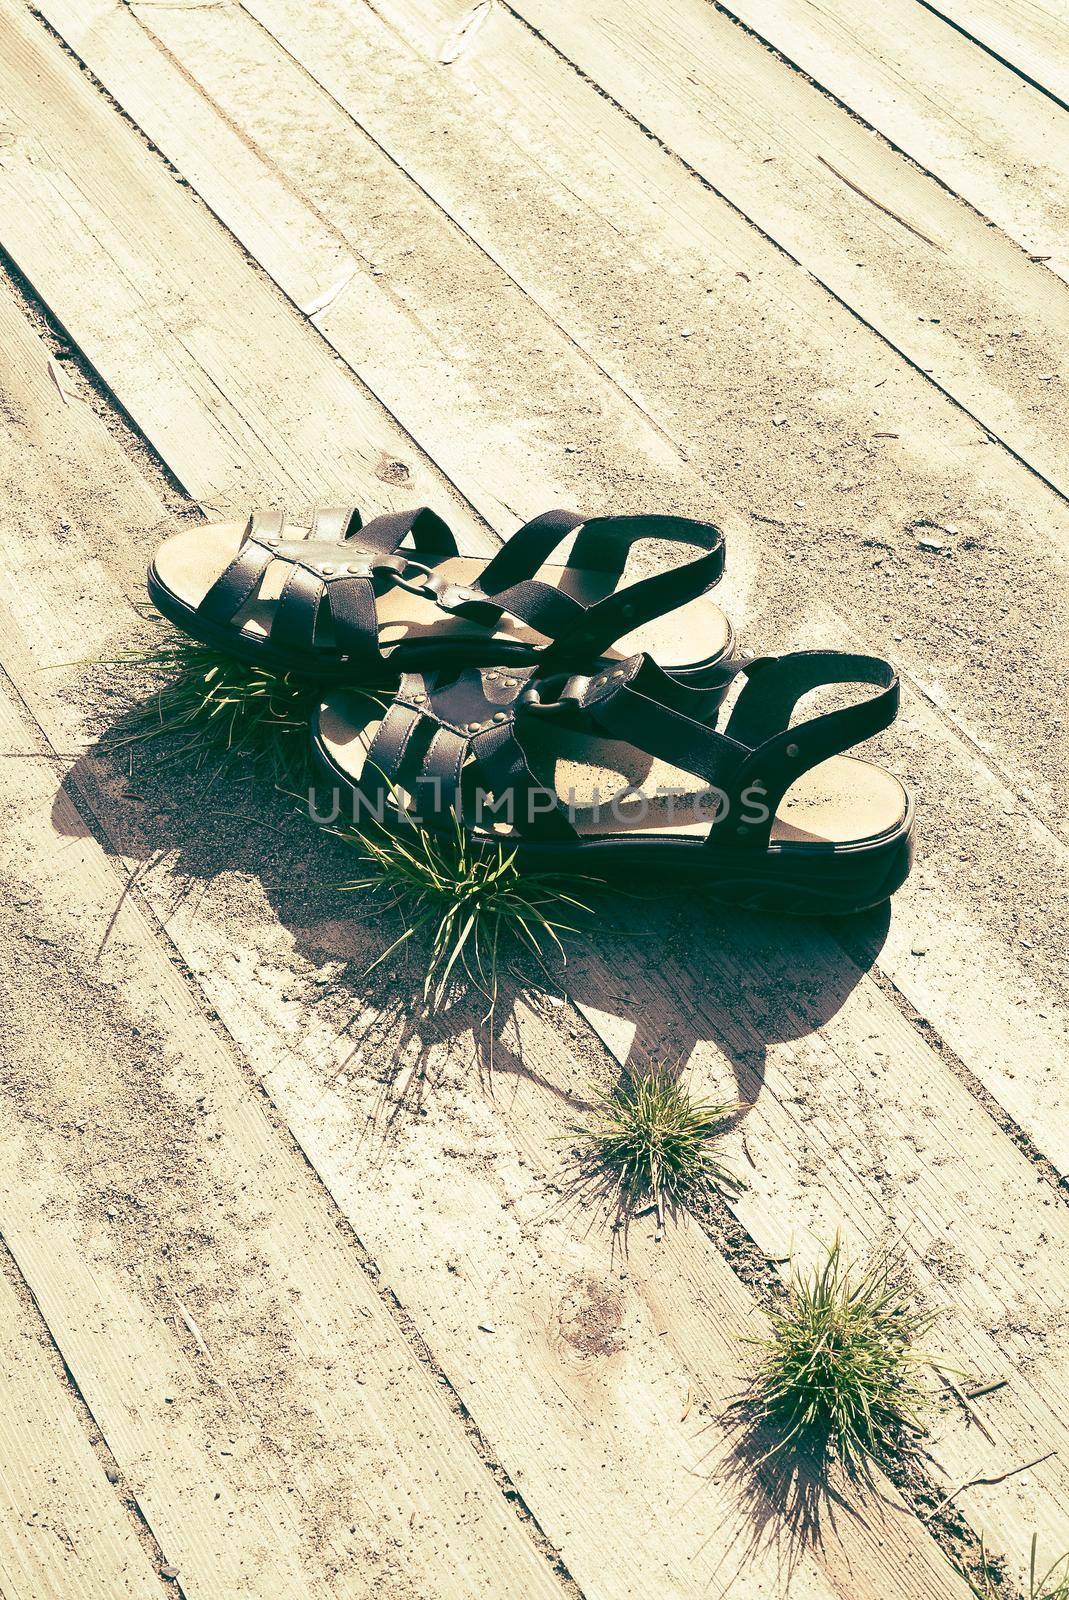 Woman summer sandals in  warm sunshine on wooden planks with sand and grass, with free empty space for copy - Concept of relaxing vacation, summertime travel and recreation.